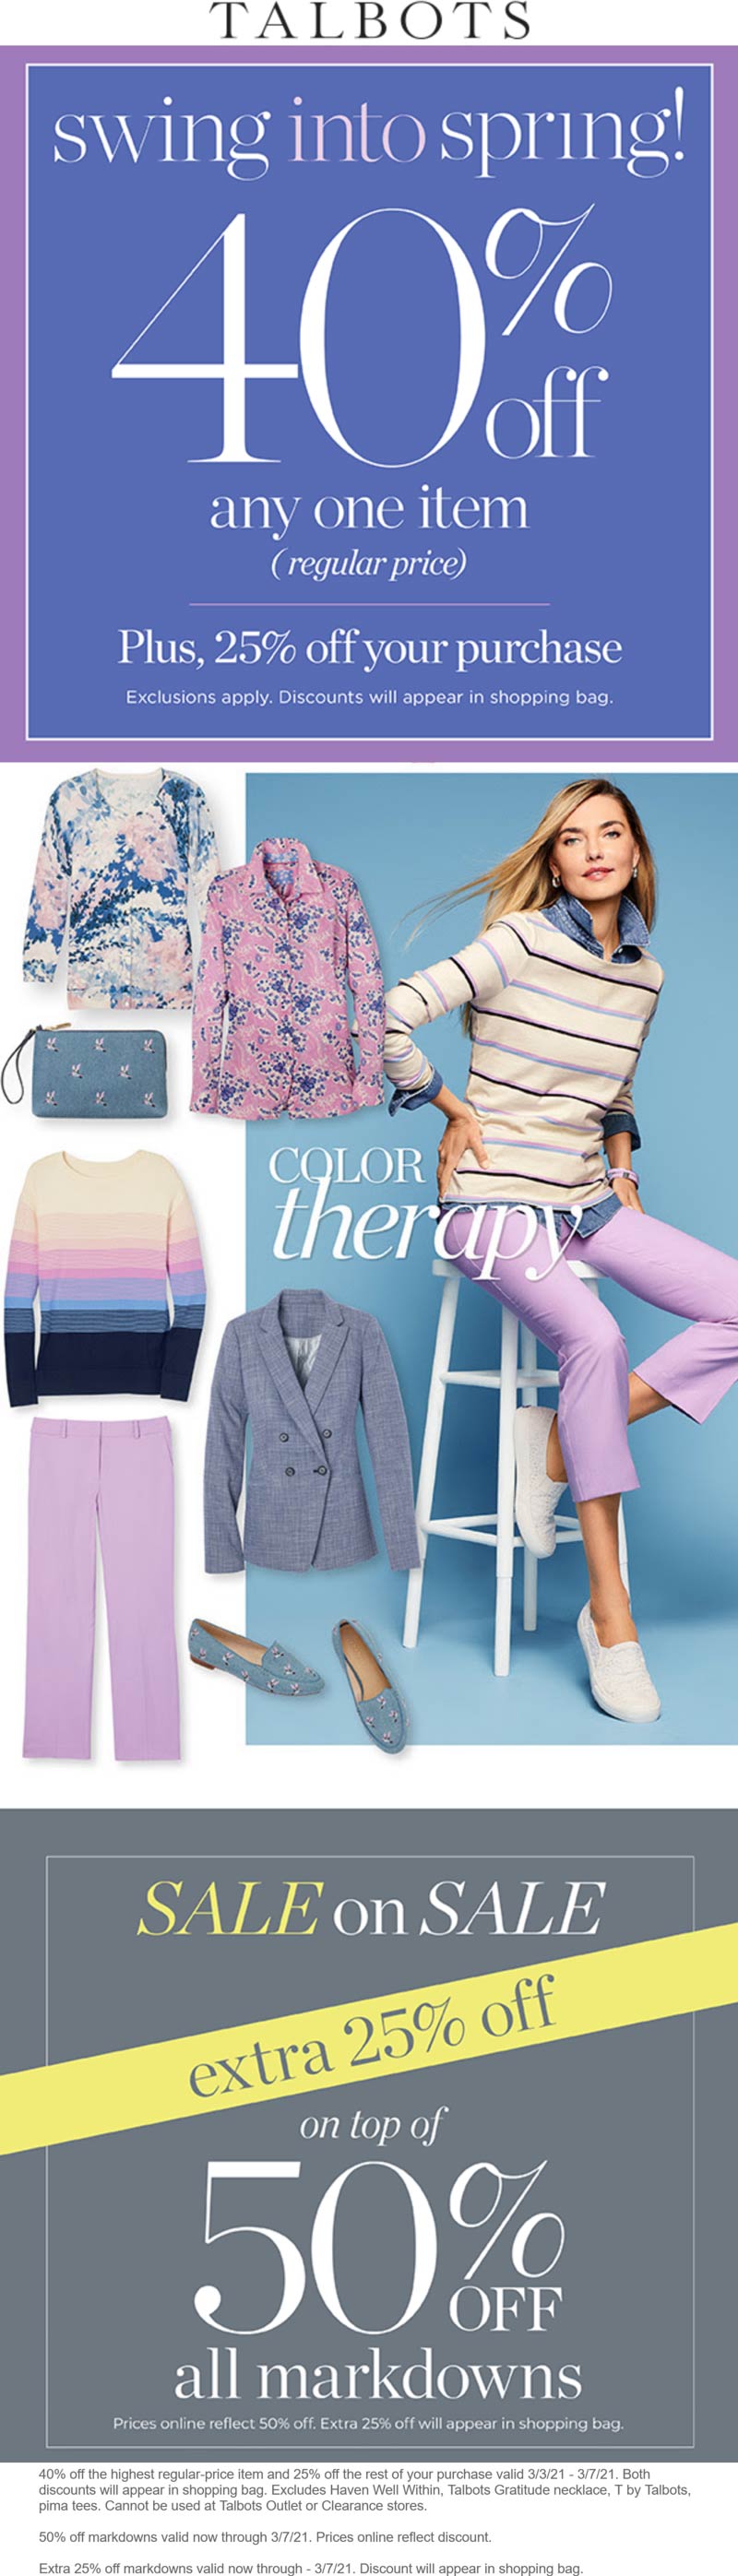 Talbots stores Coupon  40% off a single item & more at Talbots #talbots 